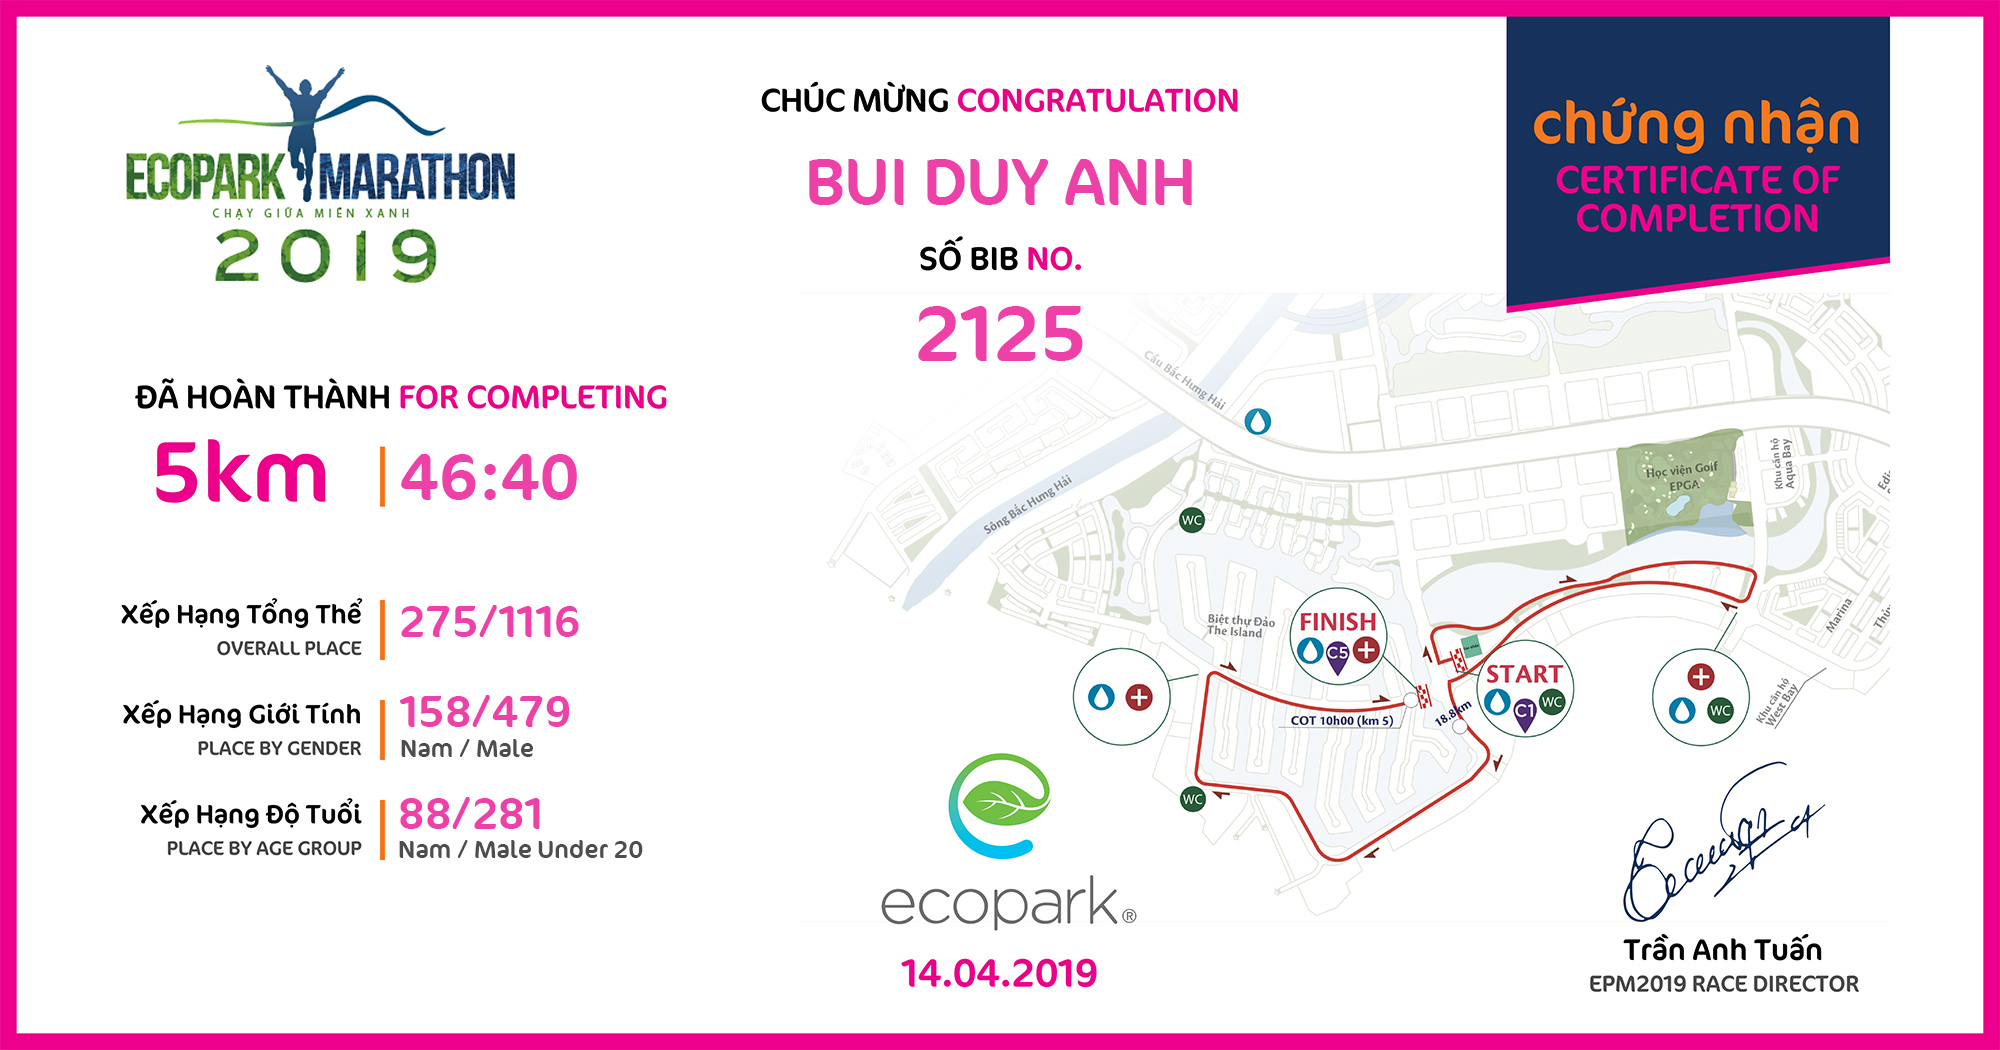 2125 - Bui Duy Anh